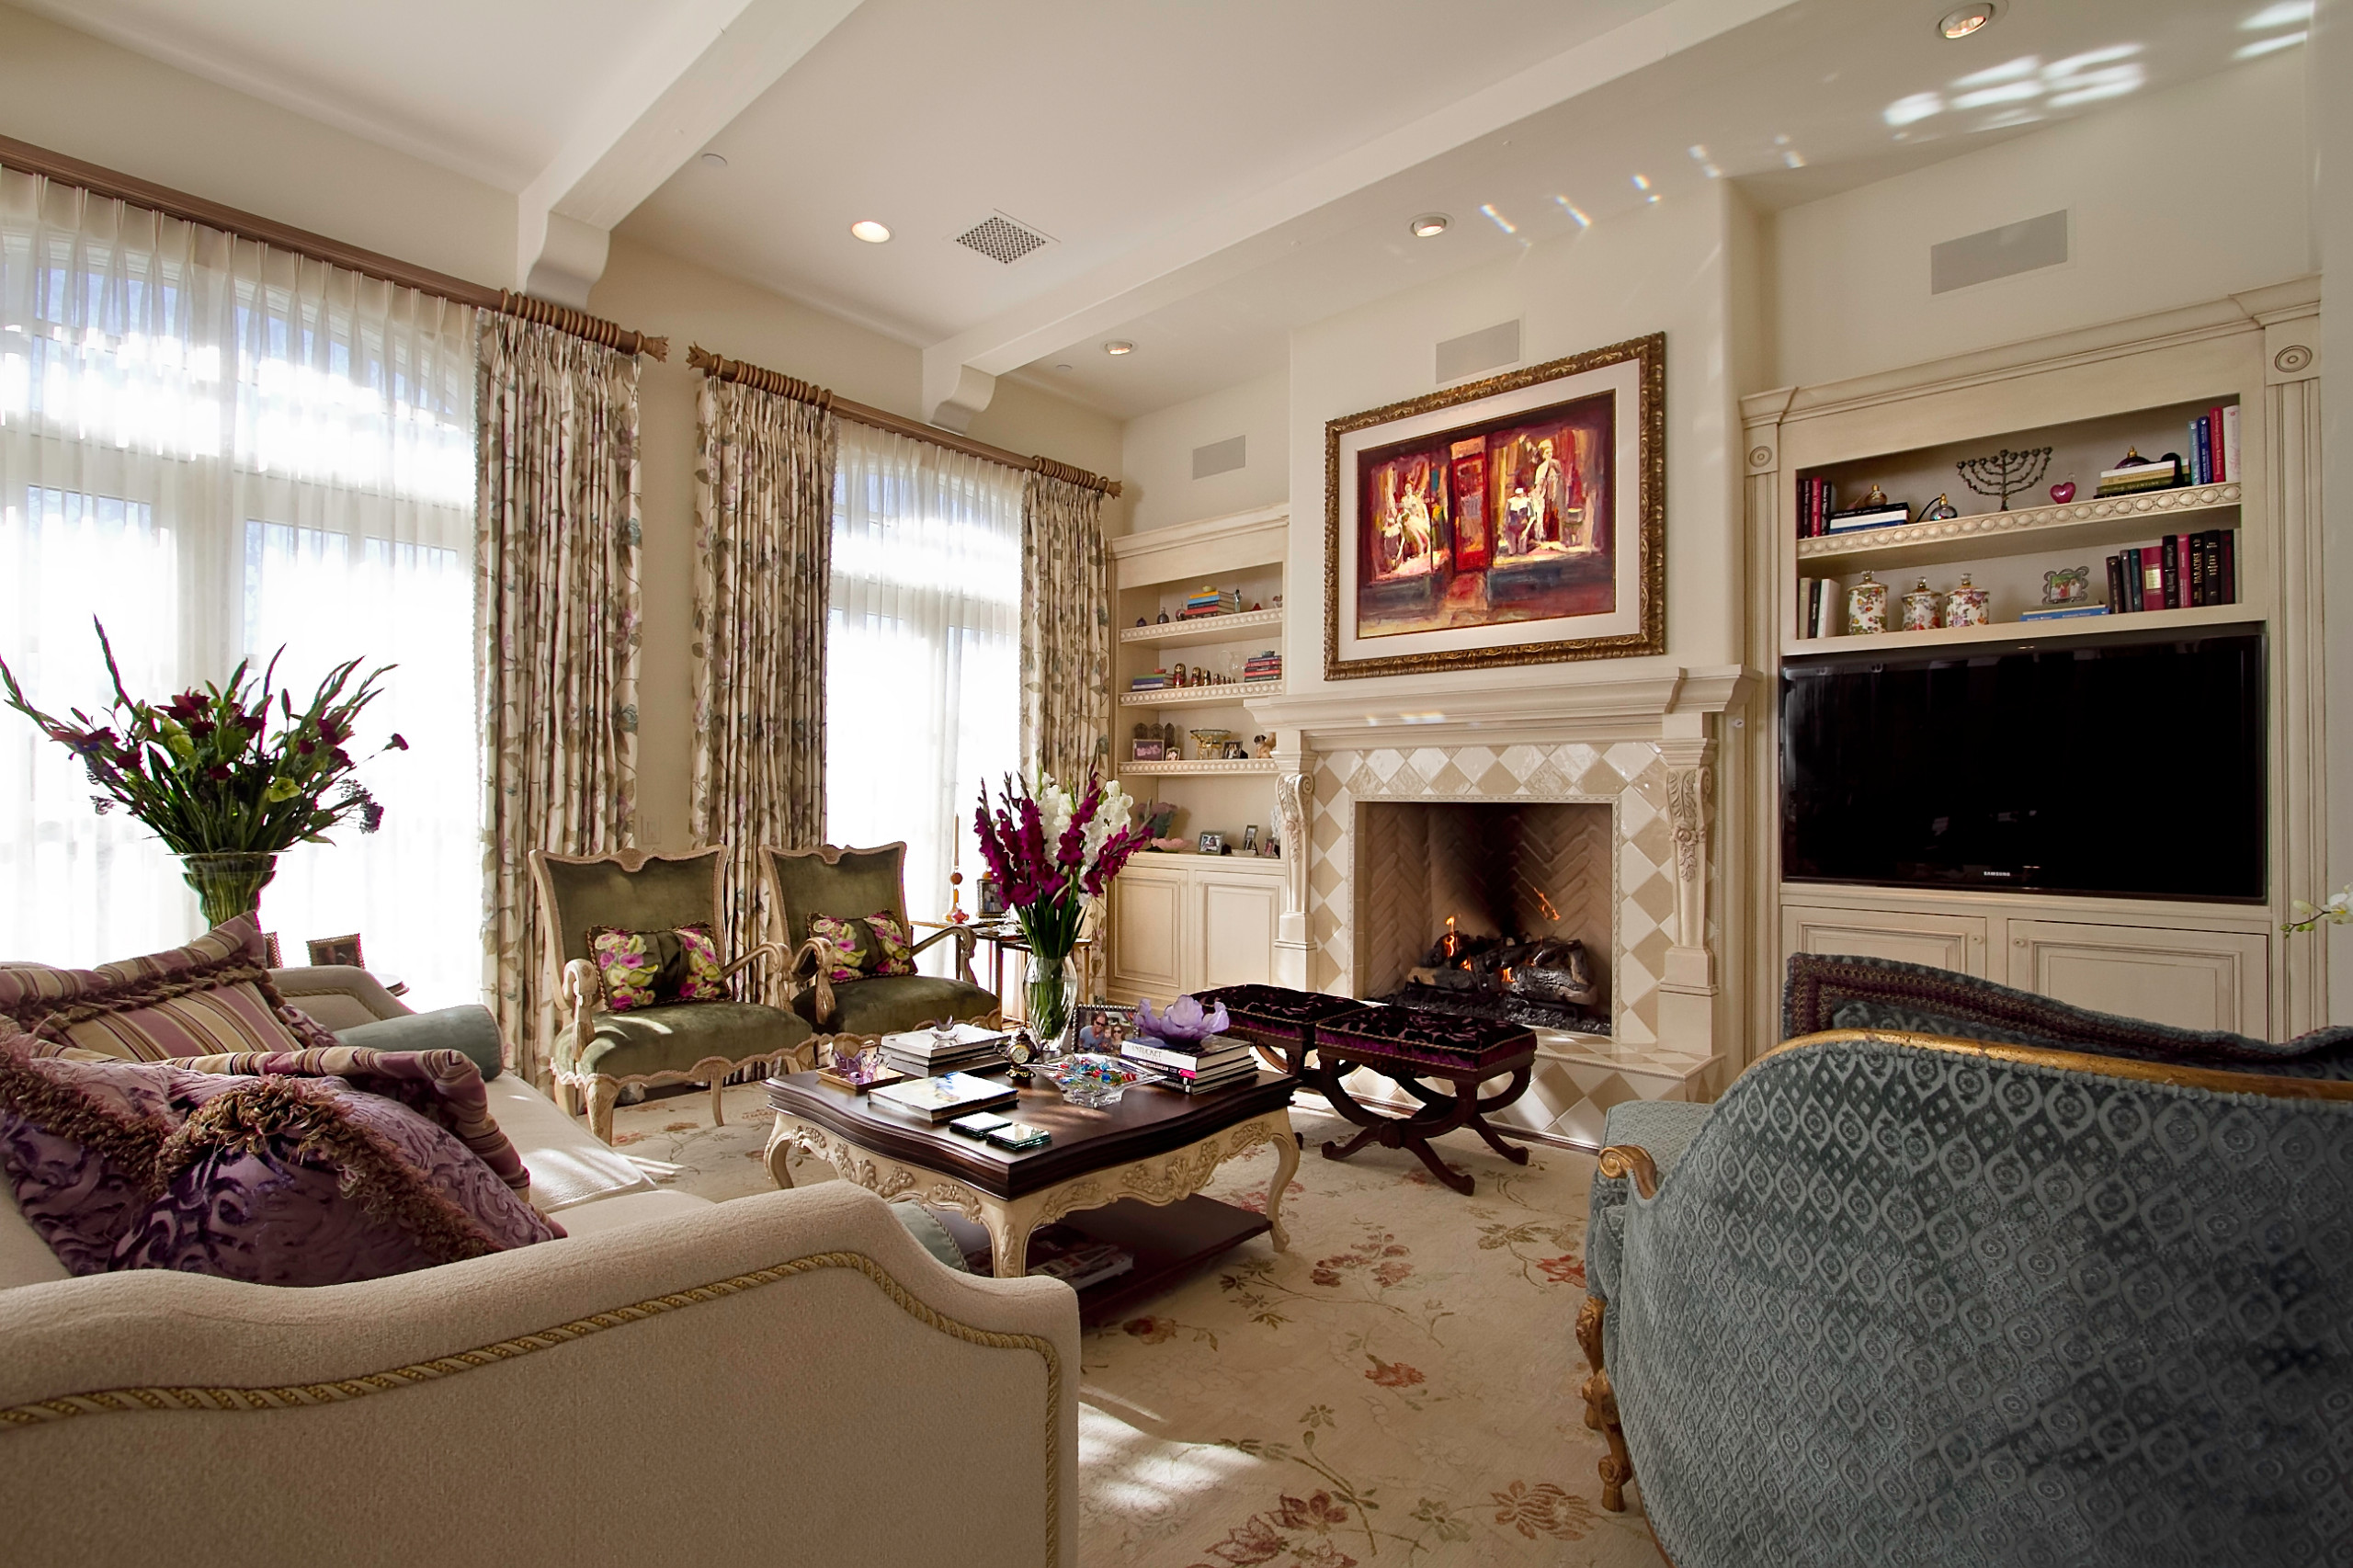 Scottsdale Elegance * 2011 THIRD PLACE - ASID - RESIDENTIAL *